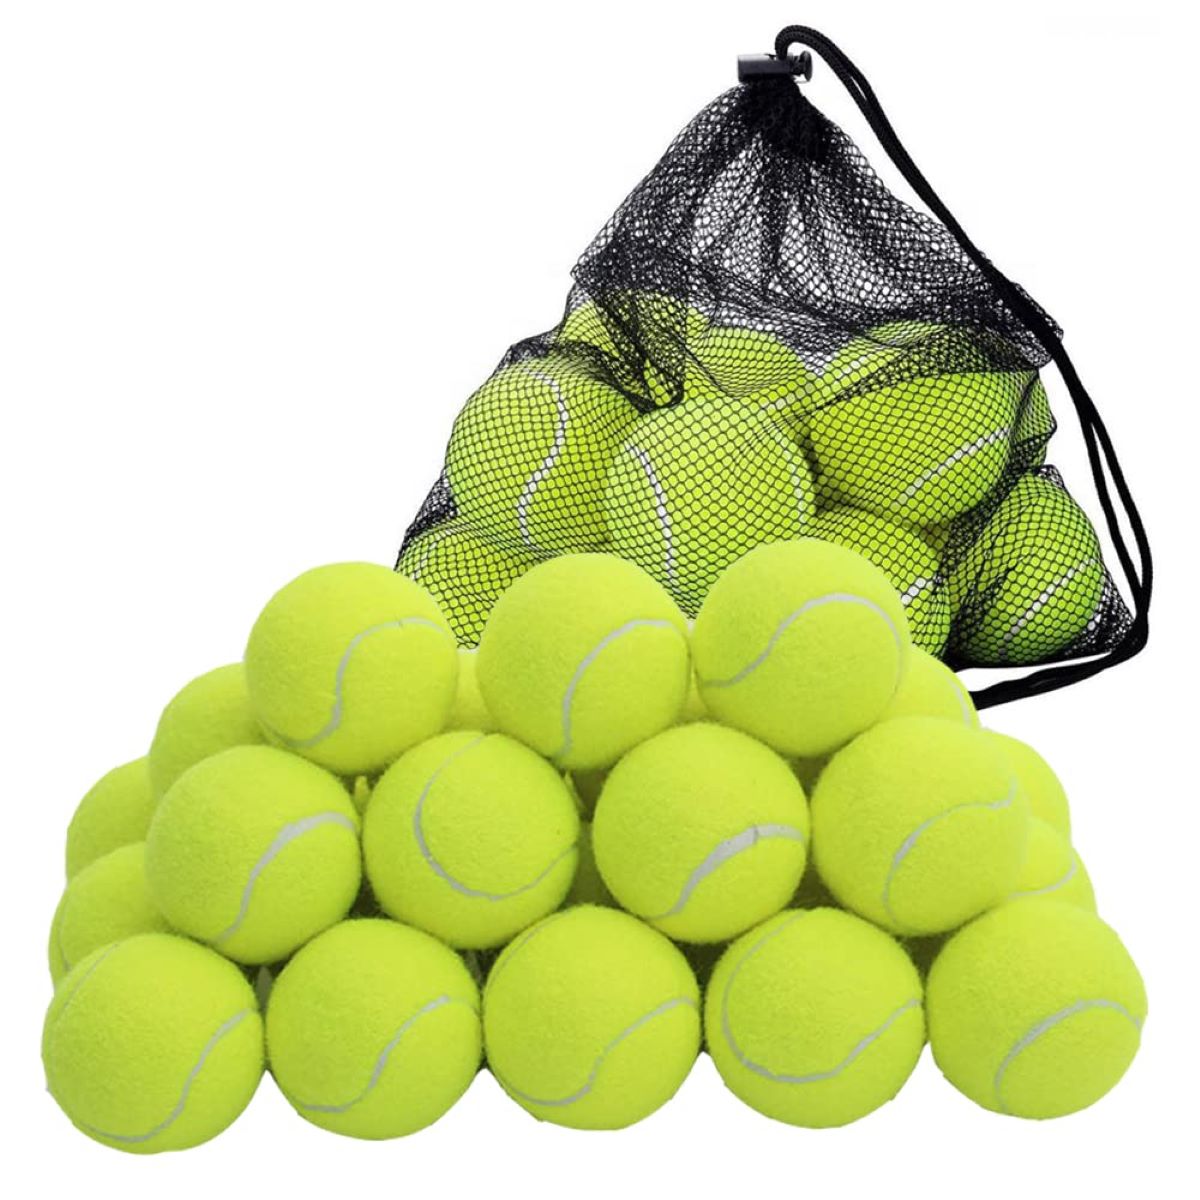 How To Store Tennis Balls